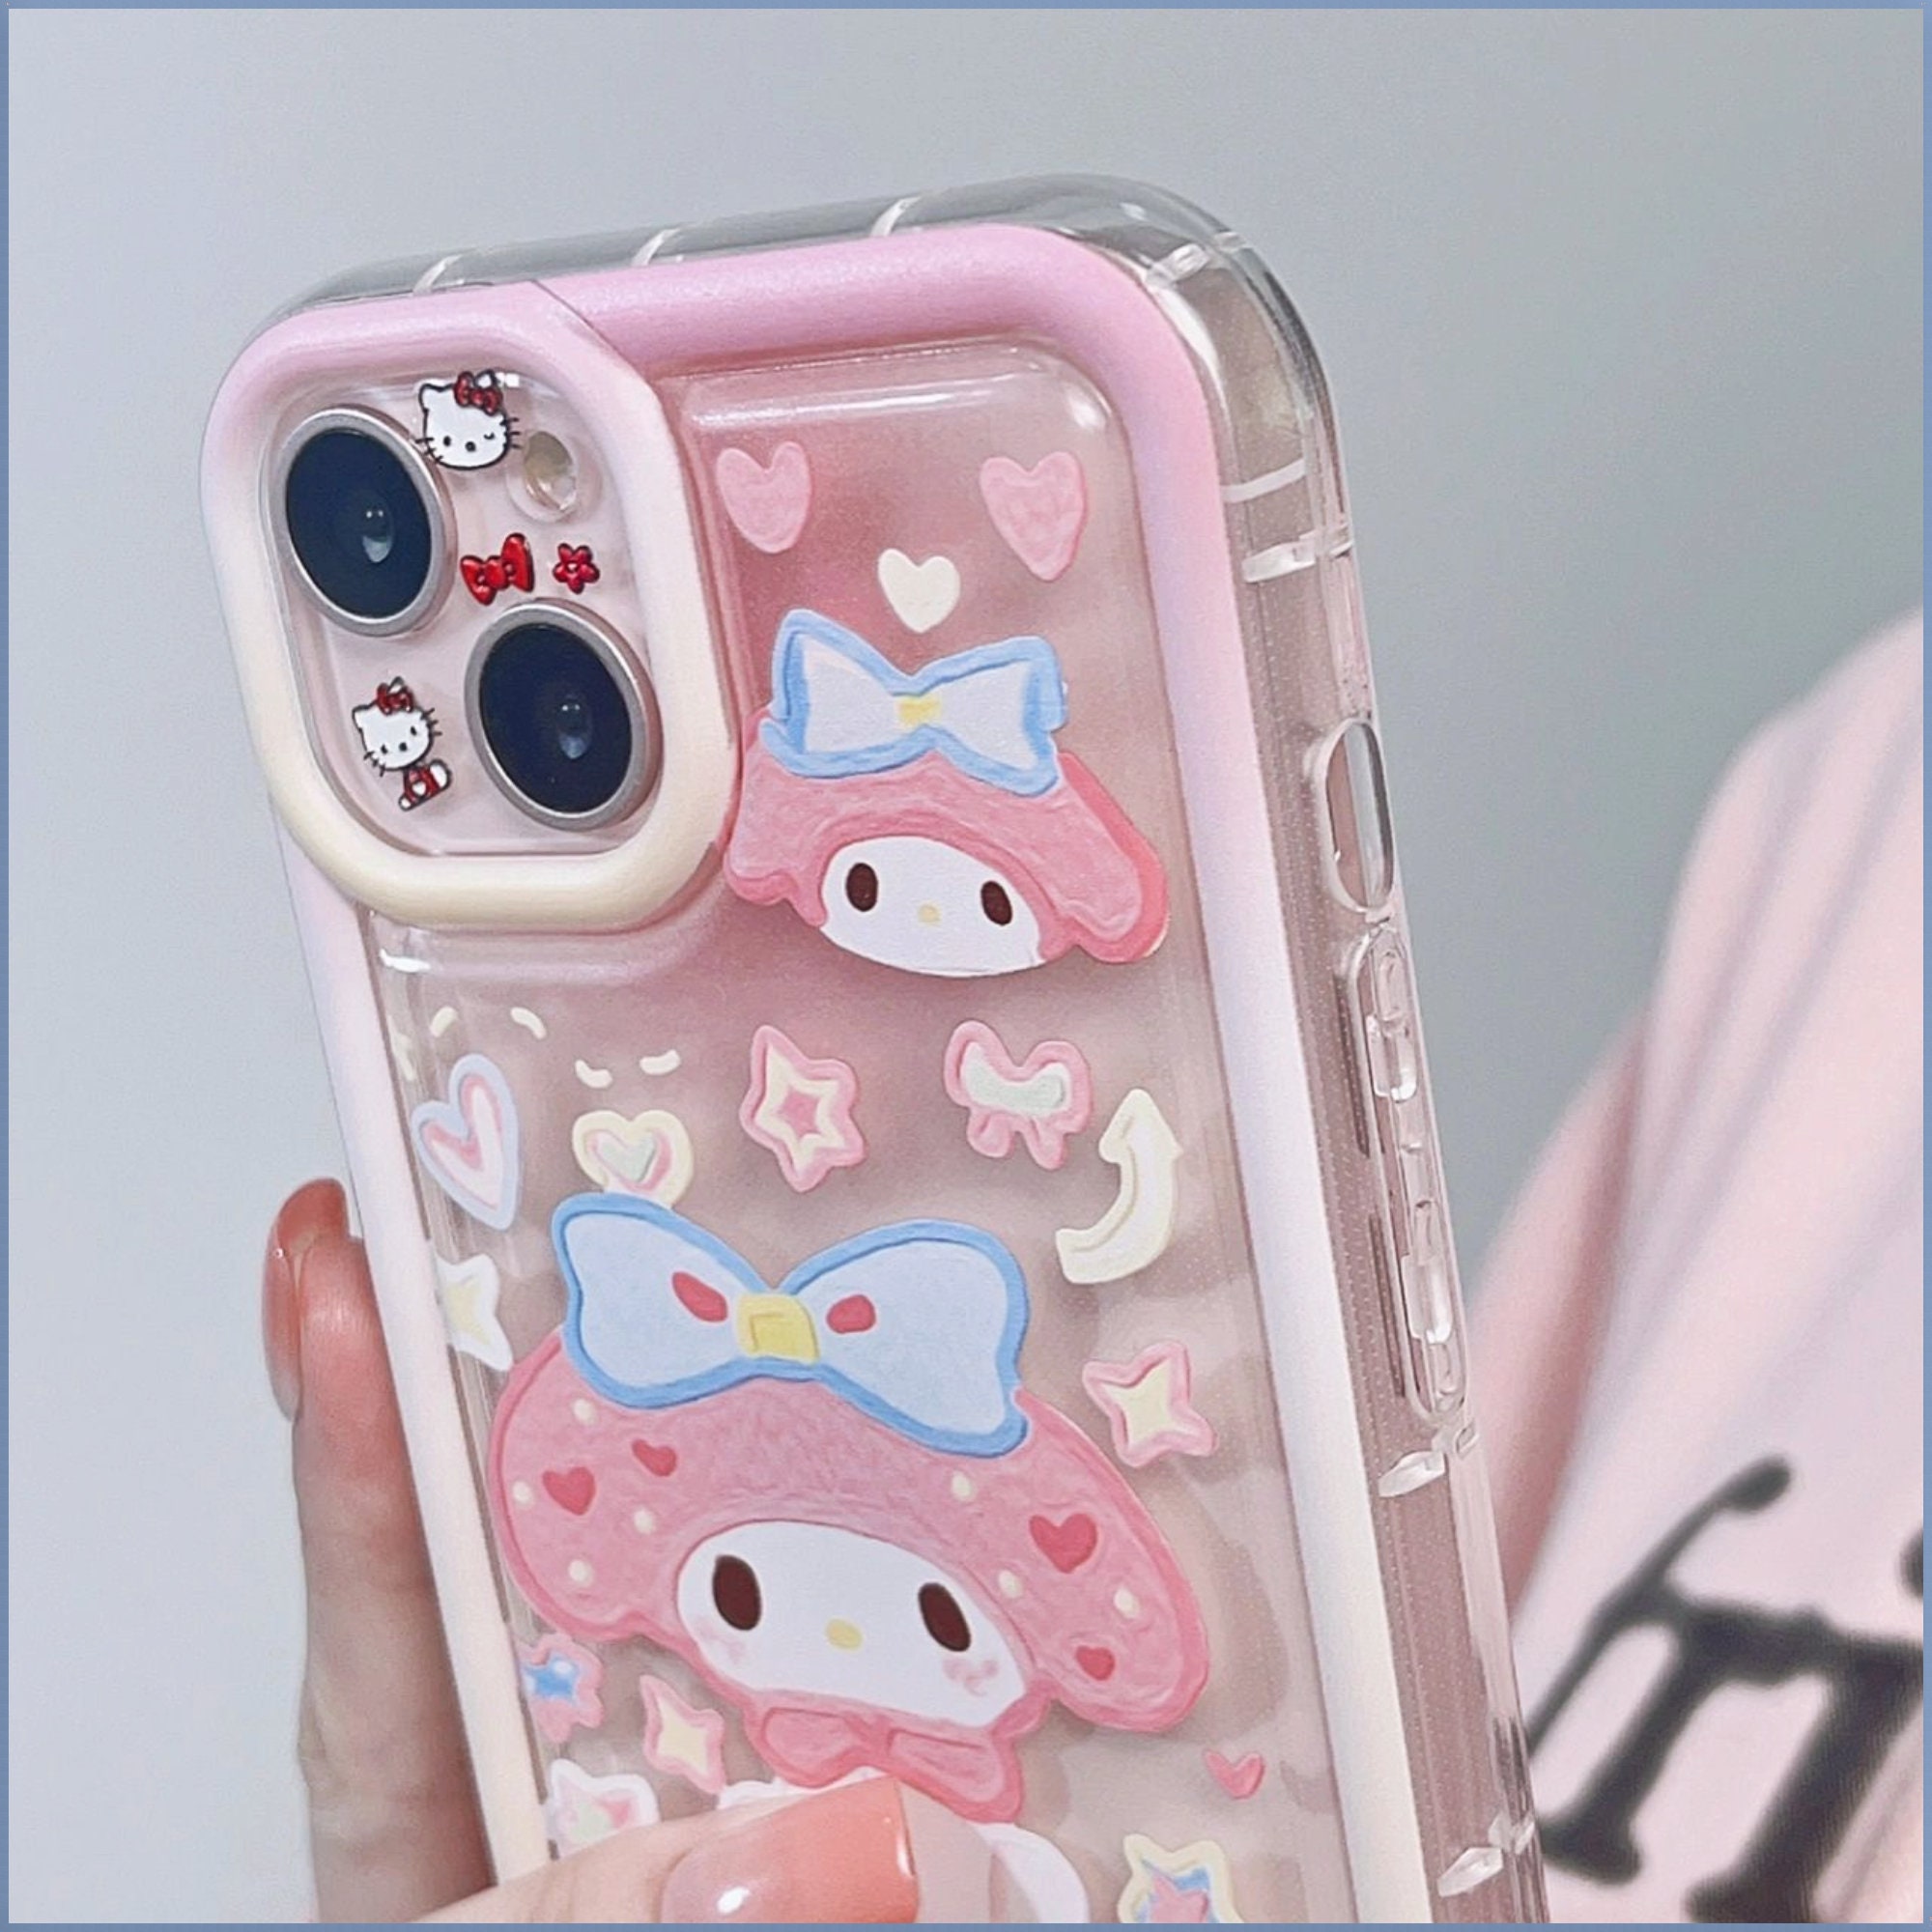 Wholesale 3D Cartoon My Melody Cinnamoroll Mobile Phone Case for Iphone 11  12 Pro Max Premium Back Cover for Apple Cellphone Accessories From  m.